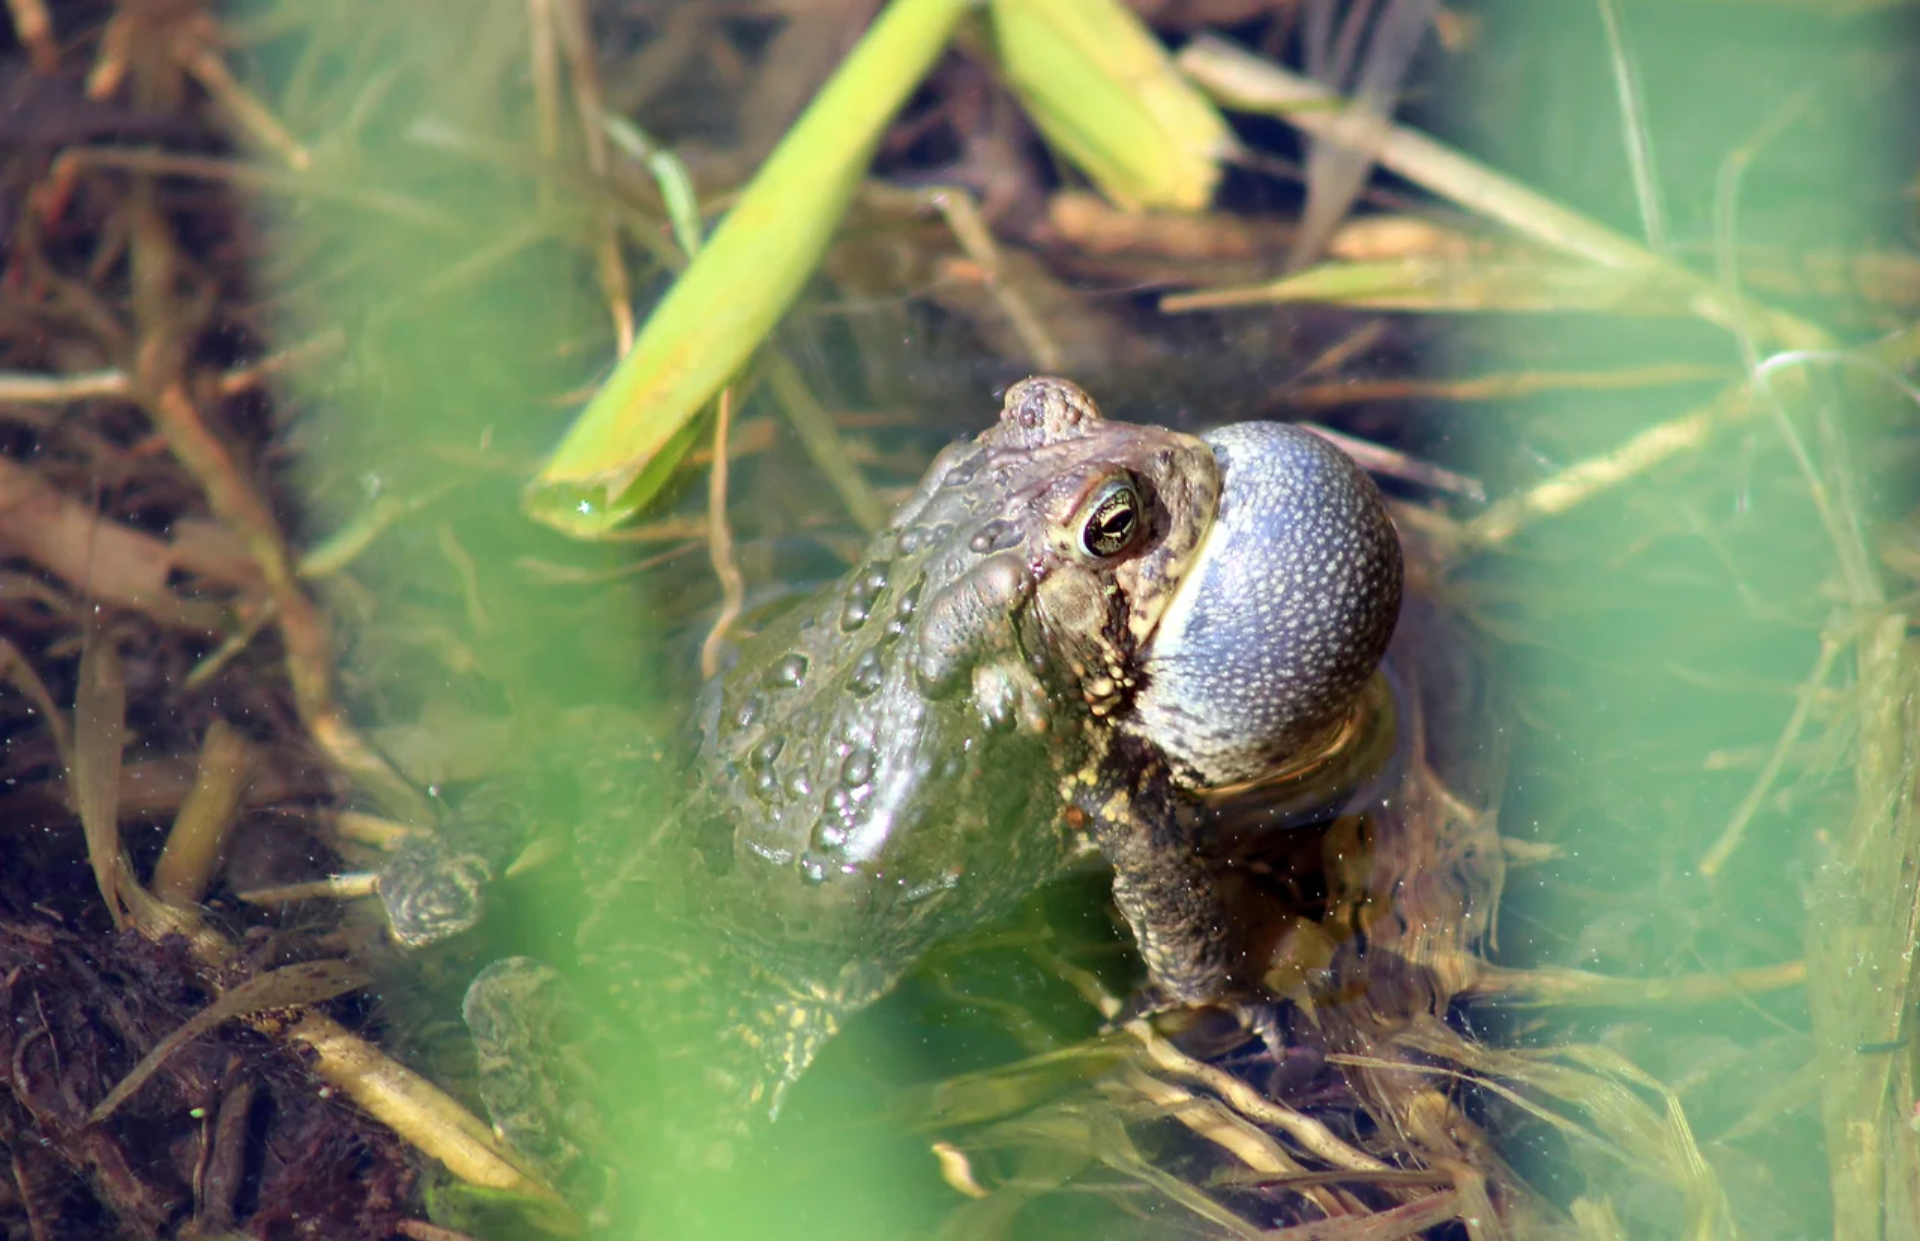 A close up shot shows a toad croaking while floating in a shallow pool of water. The view is slightly obscured by green vegetation.